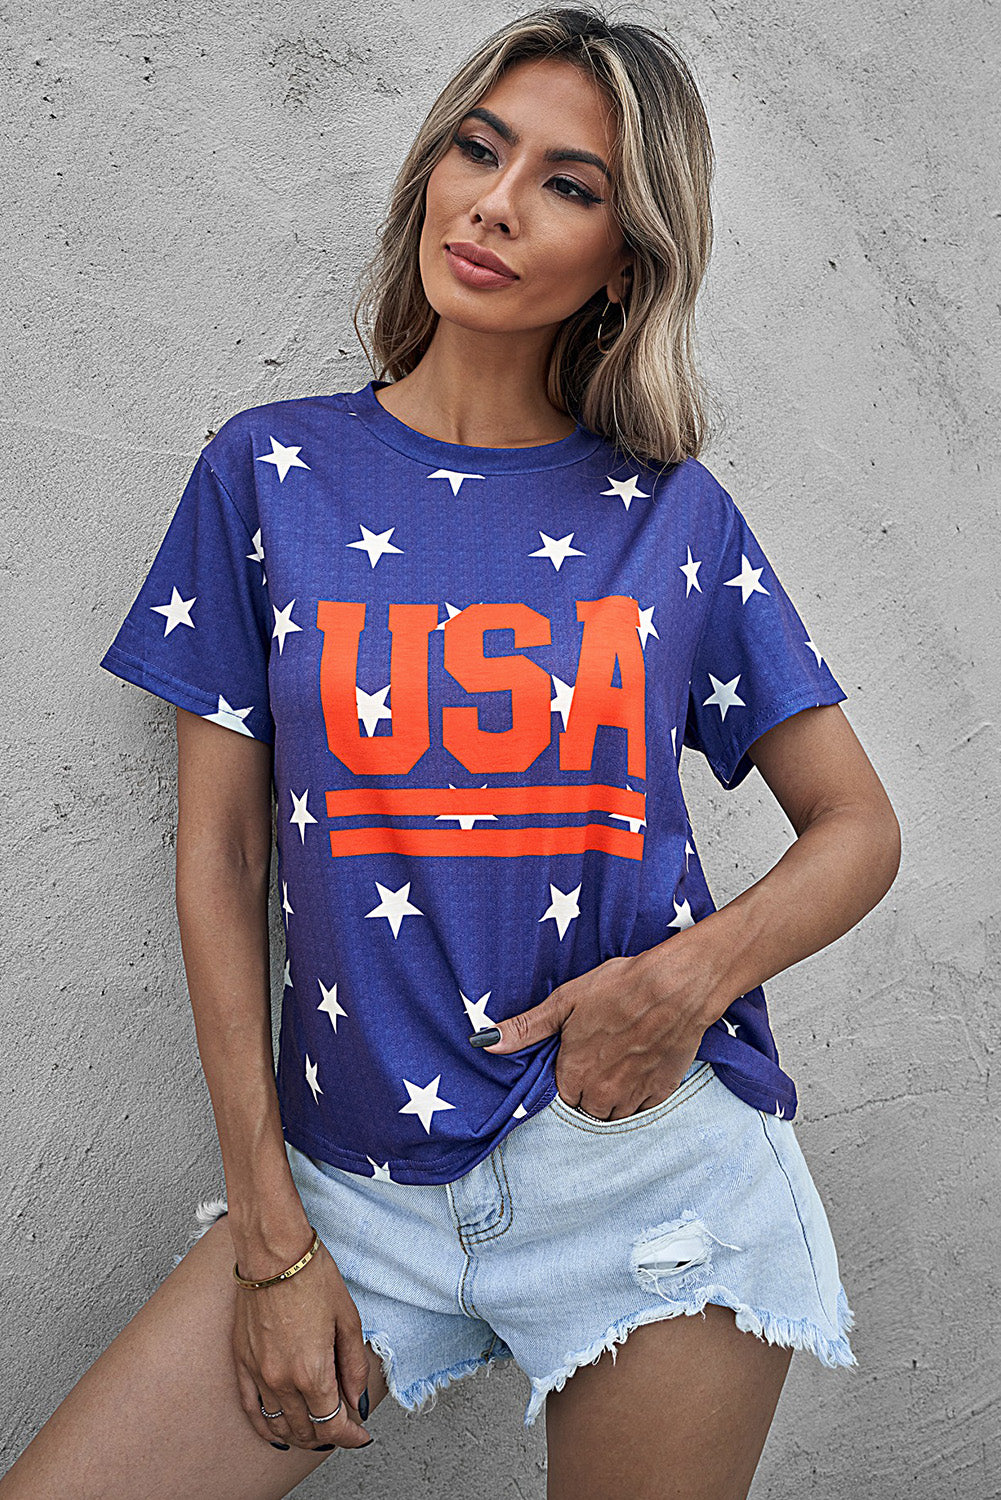 USA Star Red, White, and Blue Tee